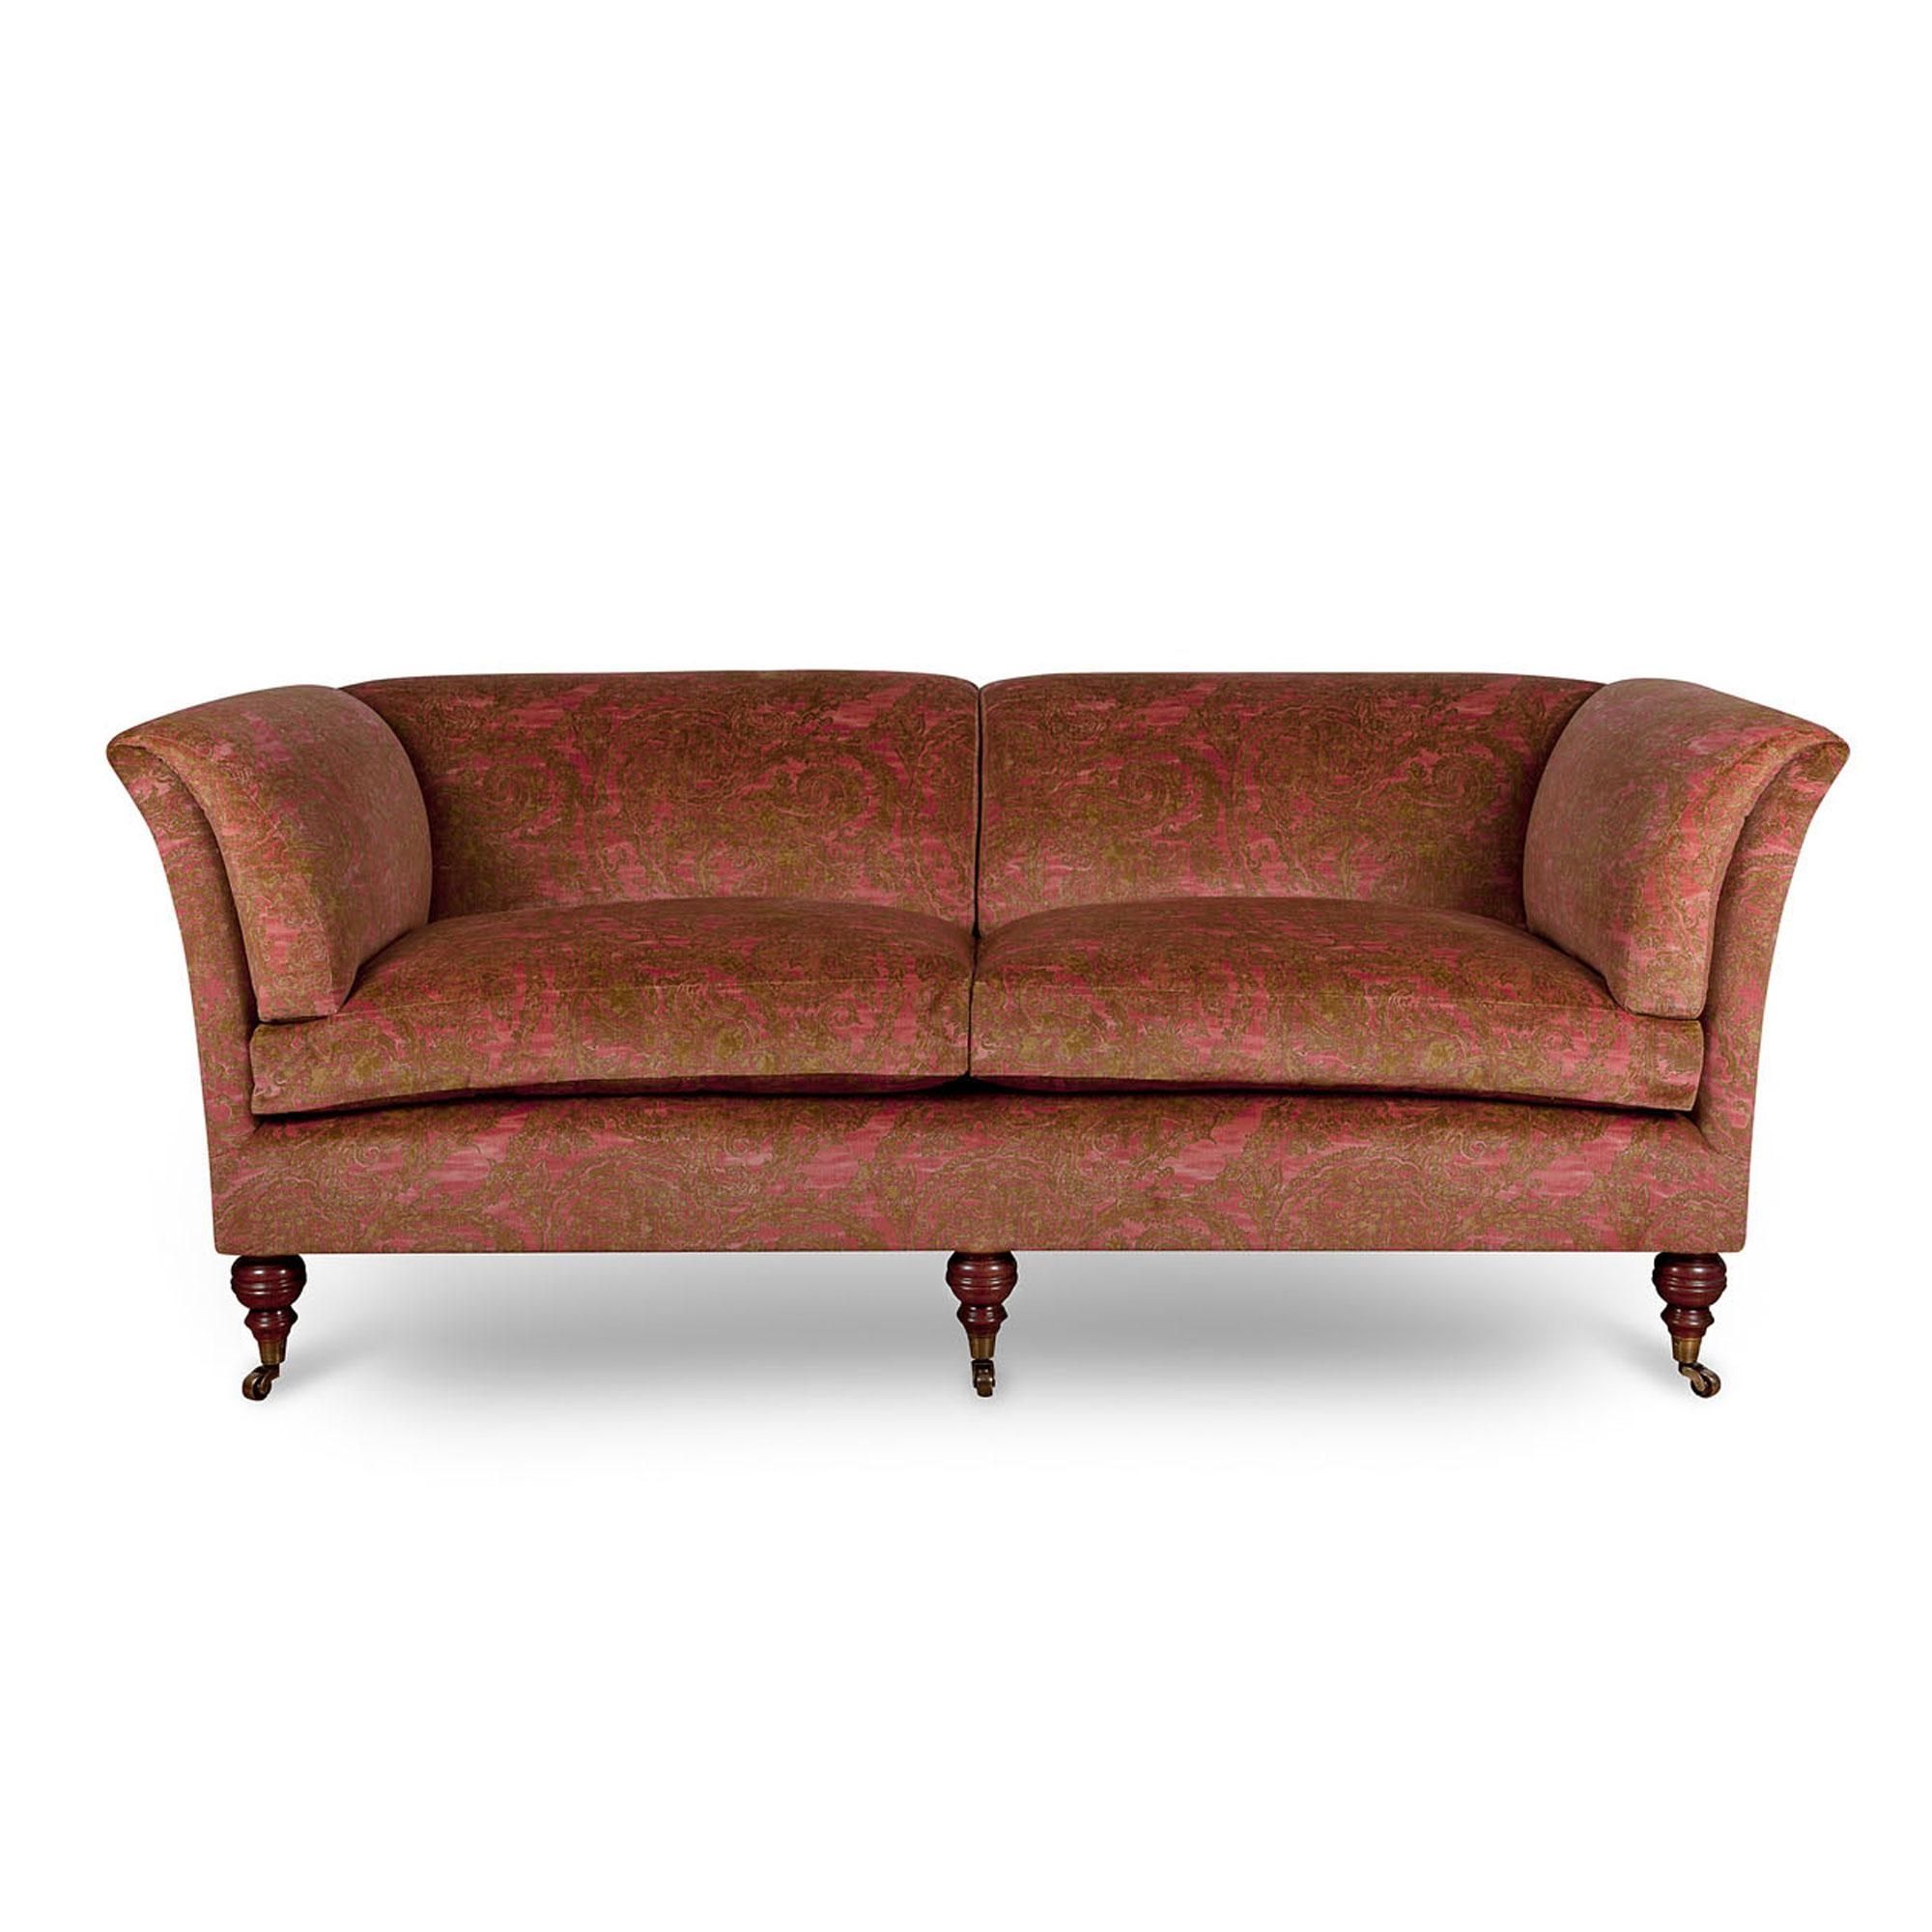 Luxury Sofas | Bespoke Sofas | Handmade Sofas | Beaumont & Fletcher Intended For Sofas With High Backs (View 12 of 20)